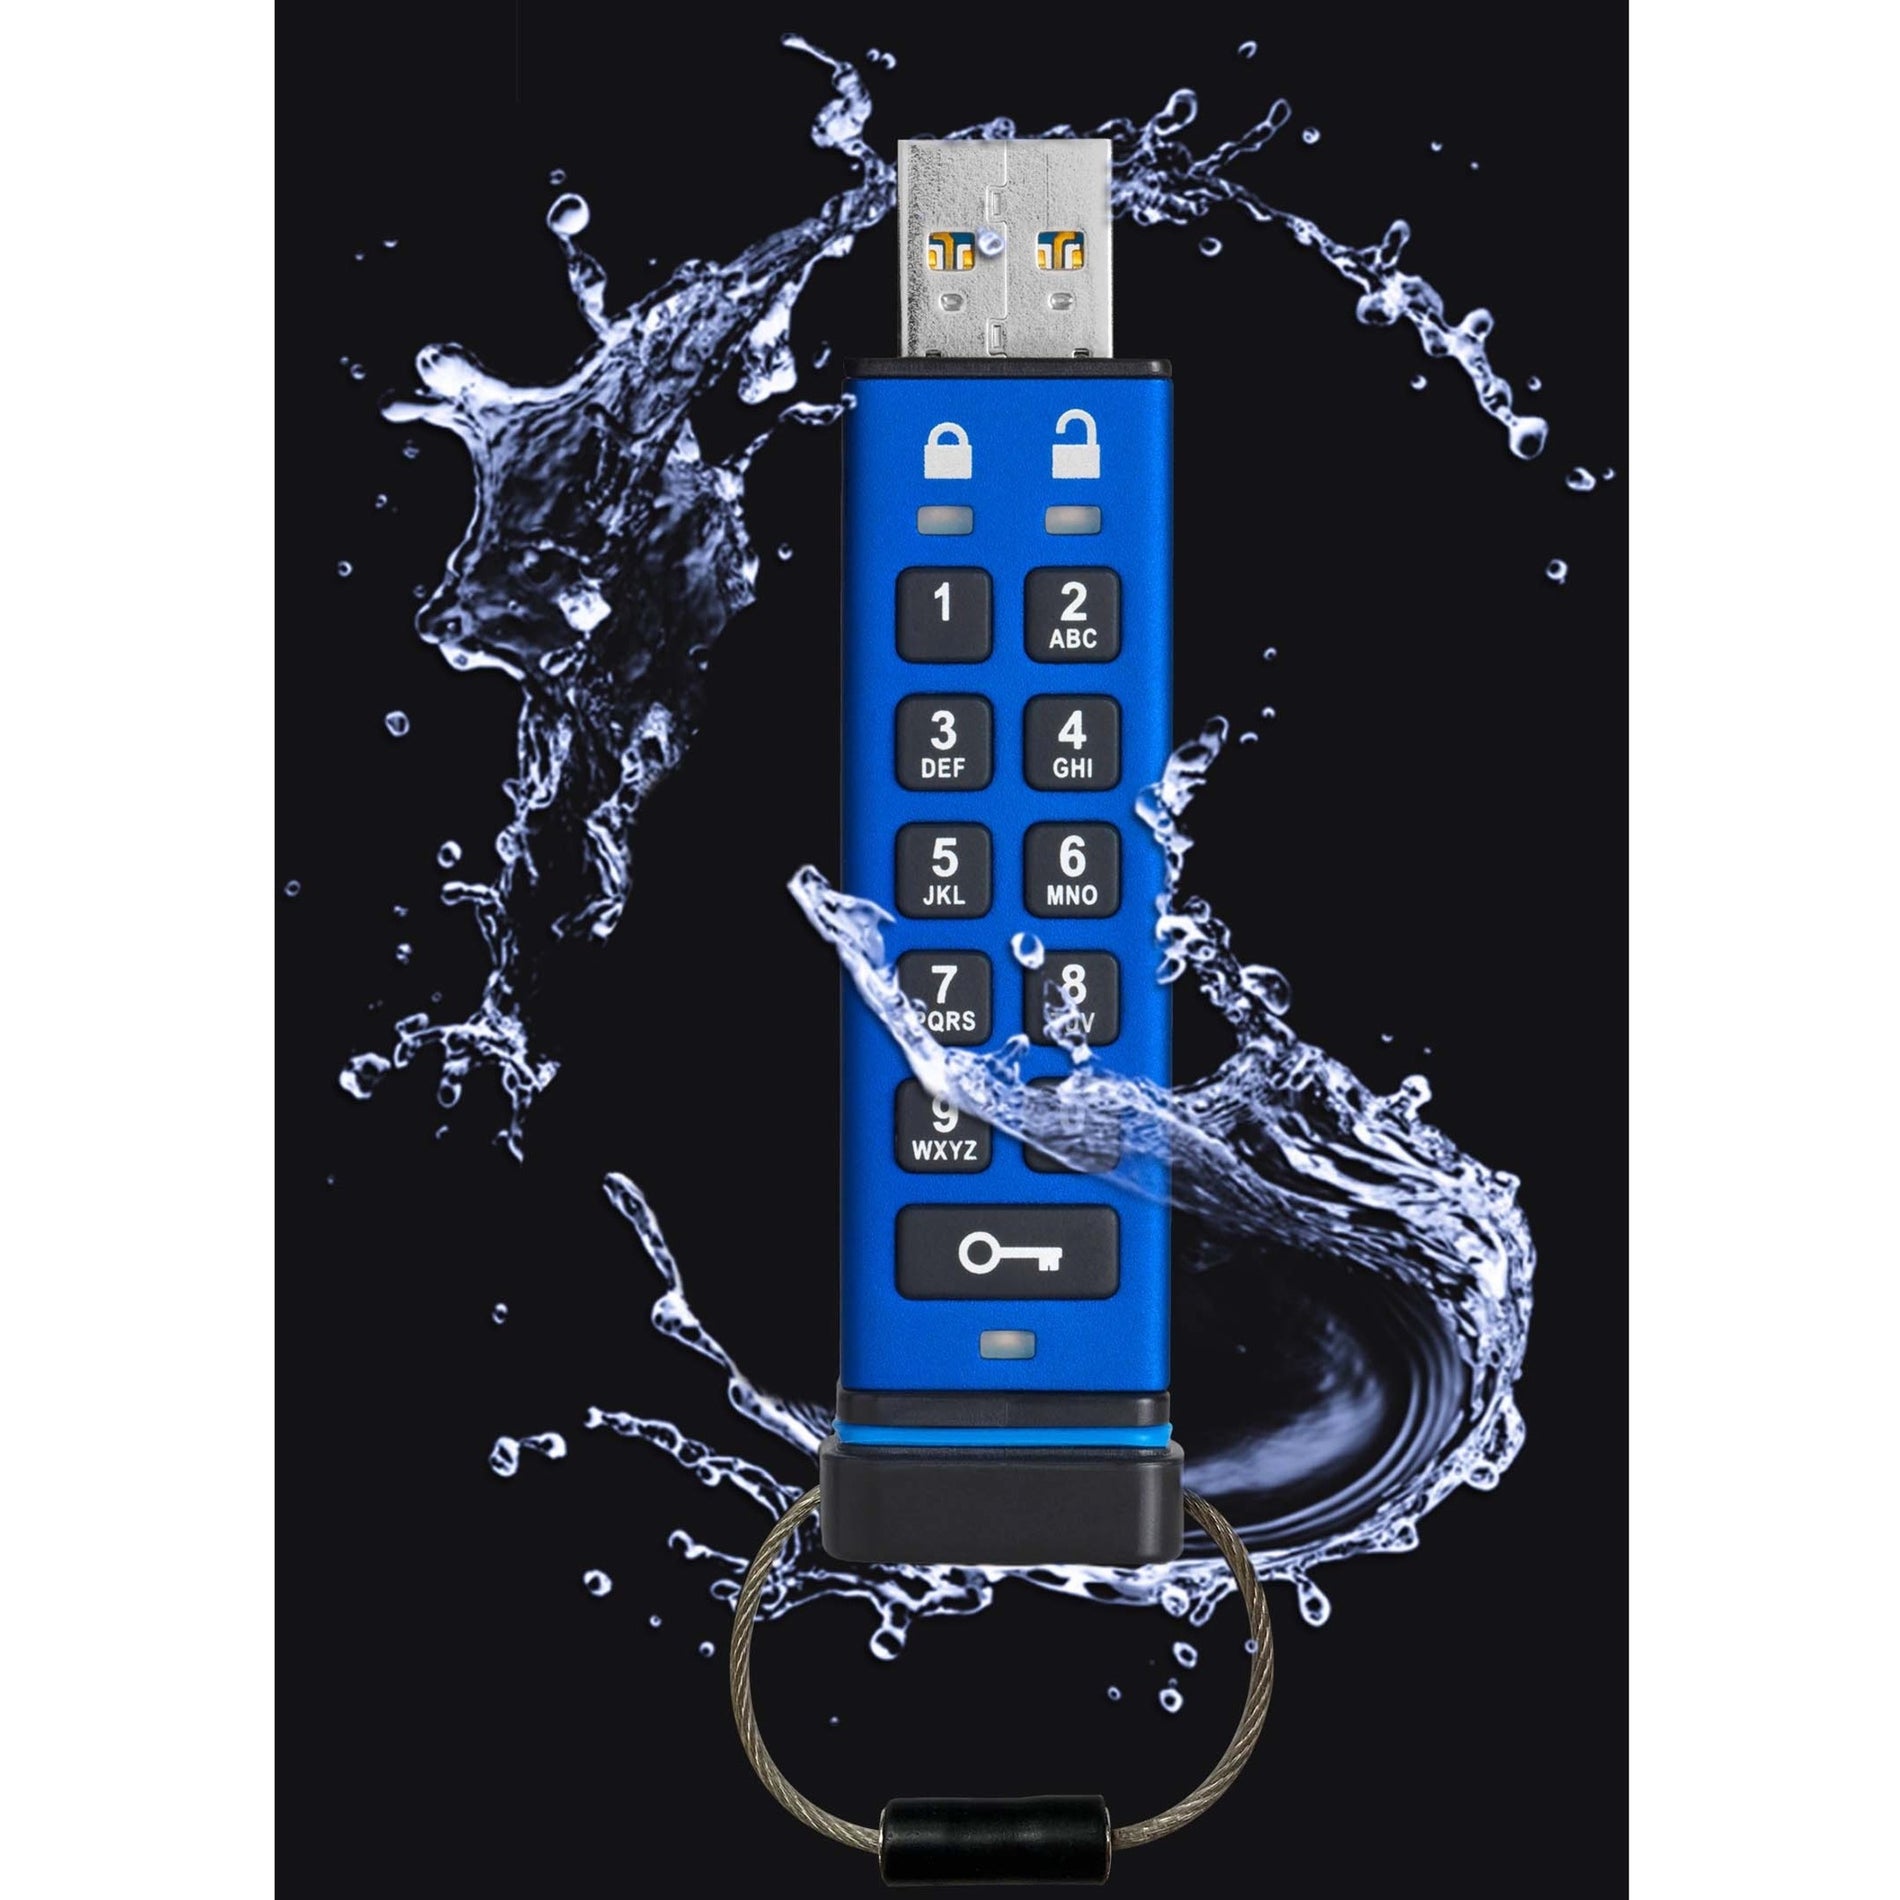 iStorage IS-FL-DA3-256-64 datAshur PRO 64GB USB 3.2 (Gen 1) Type A Flash Drive, Secure, FIPS 140-2 Level 3 Certified, Password Protected, Dust/Water Resistant